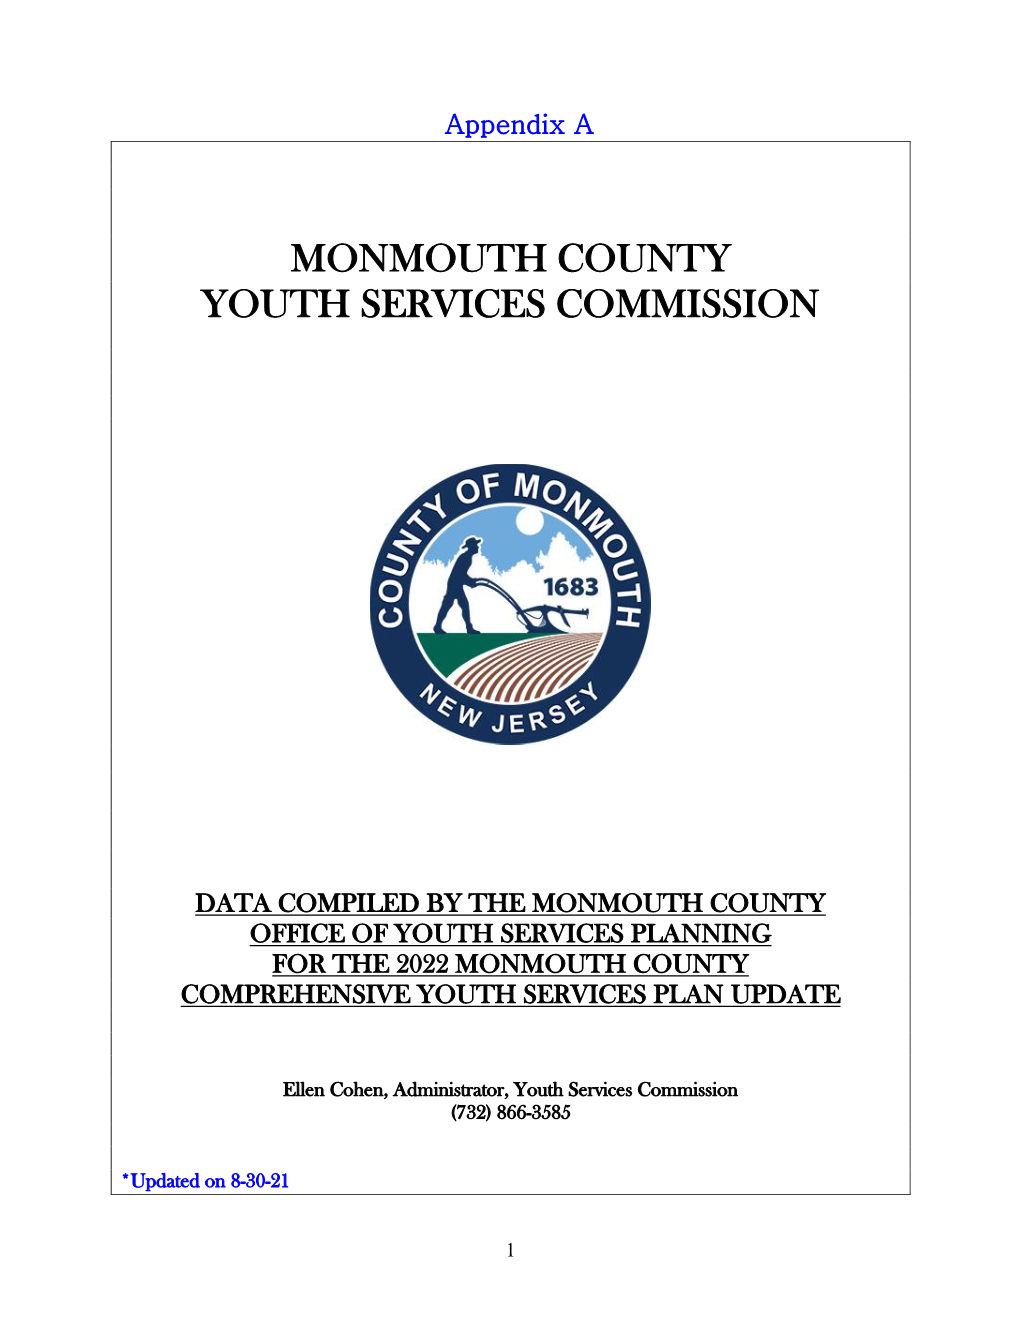 Prepared by the Monmouth County Office of Youth Services Planning